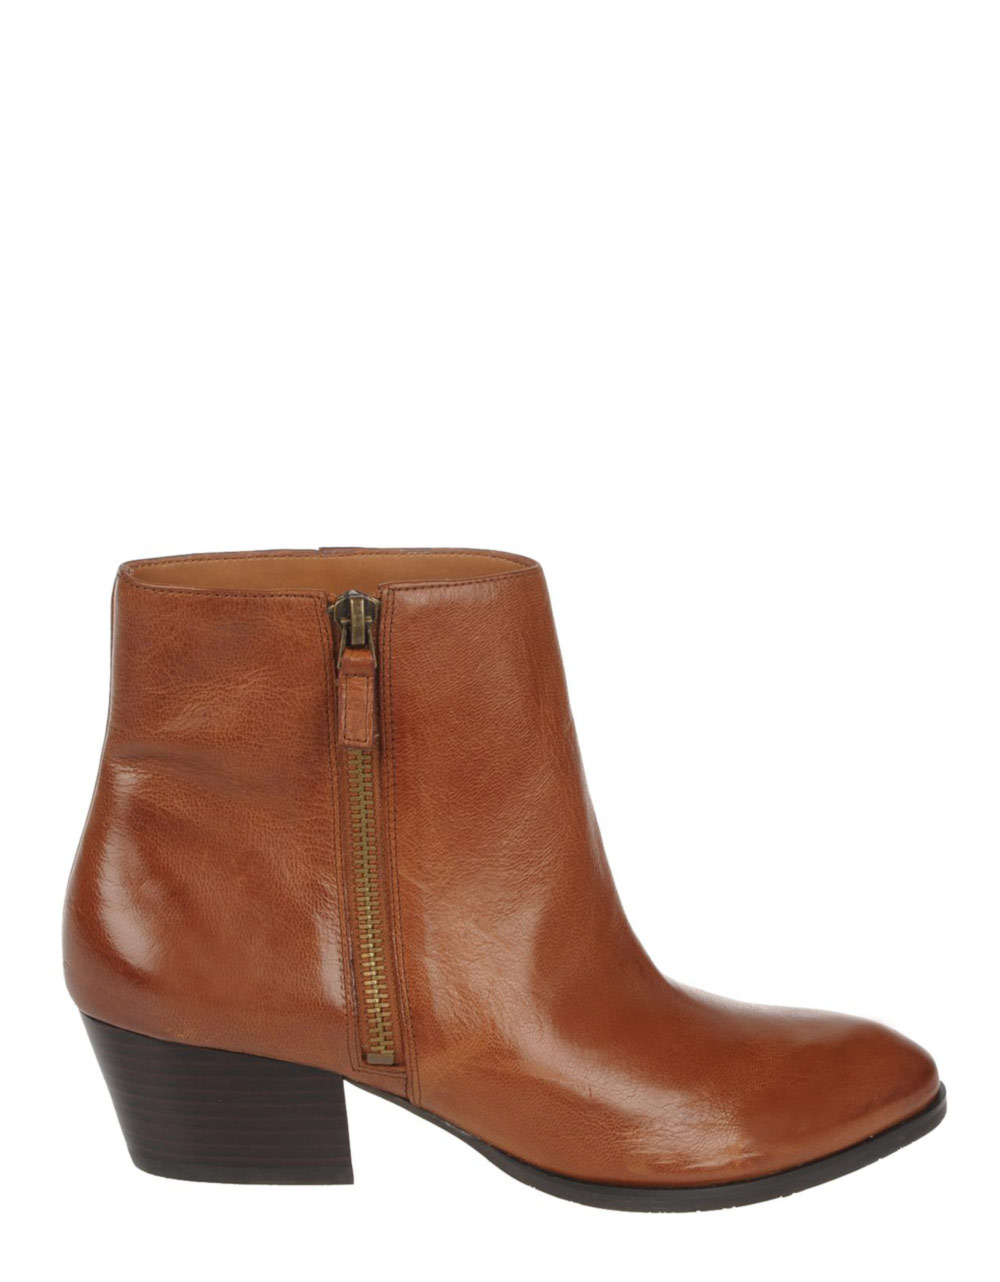 Lyst - Franco Sarto Leather Ankle Boots in Brown